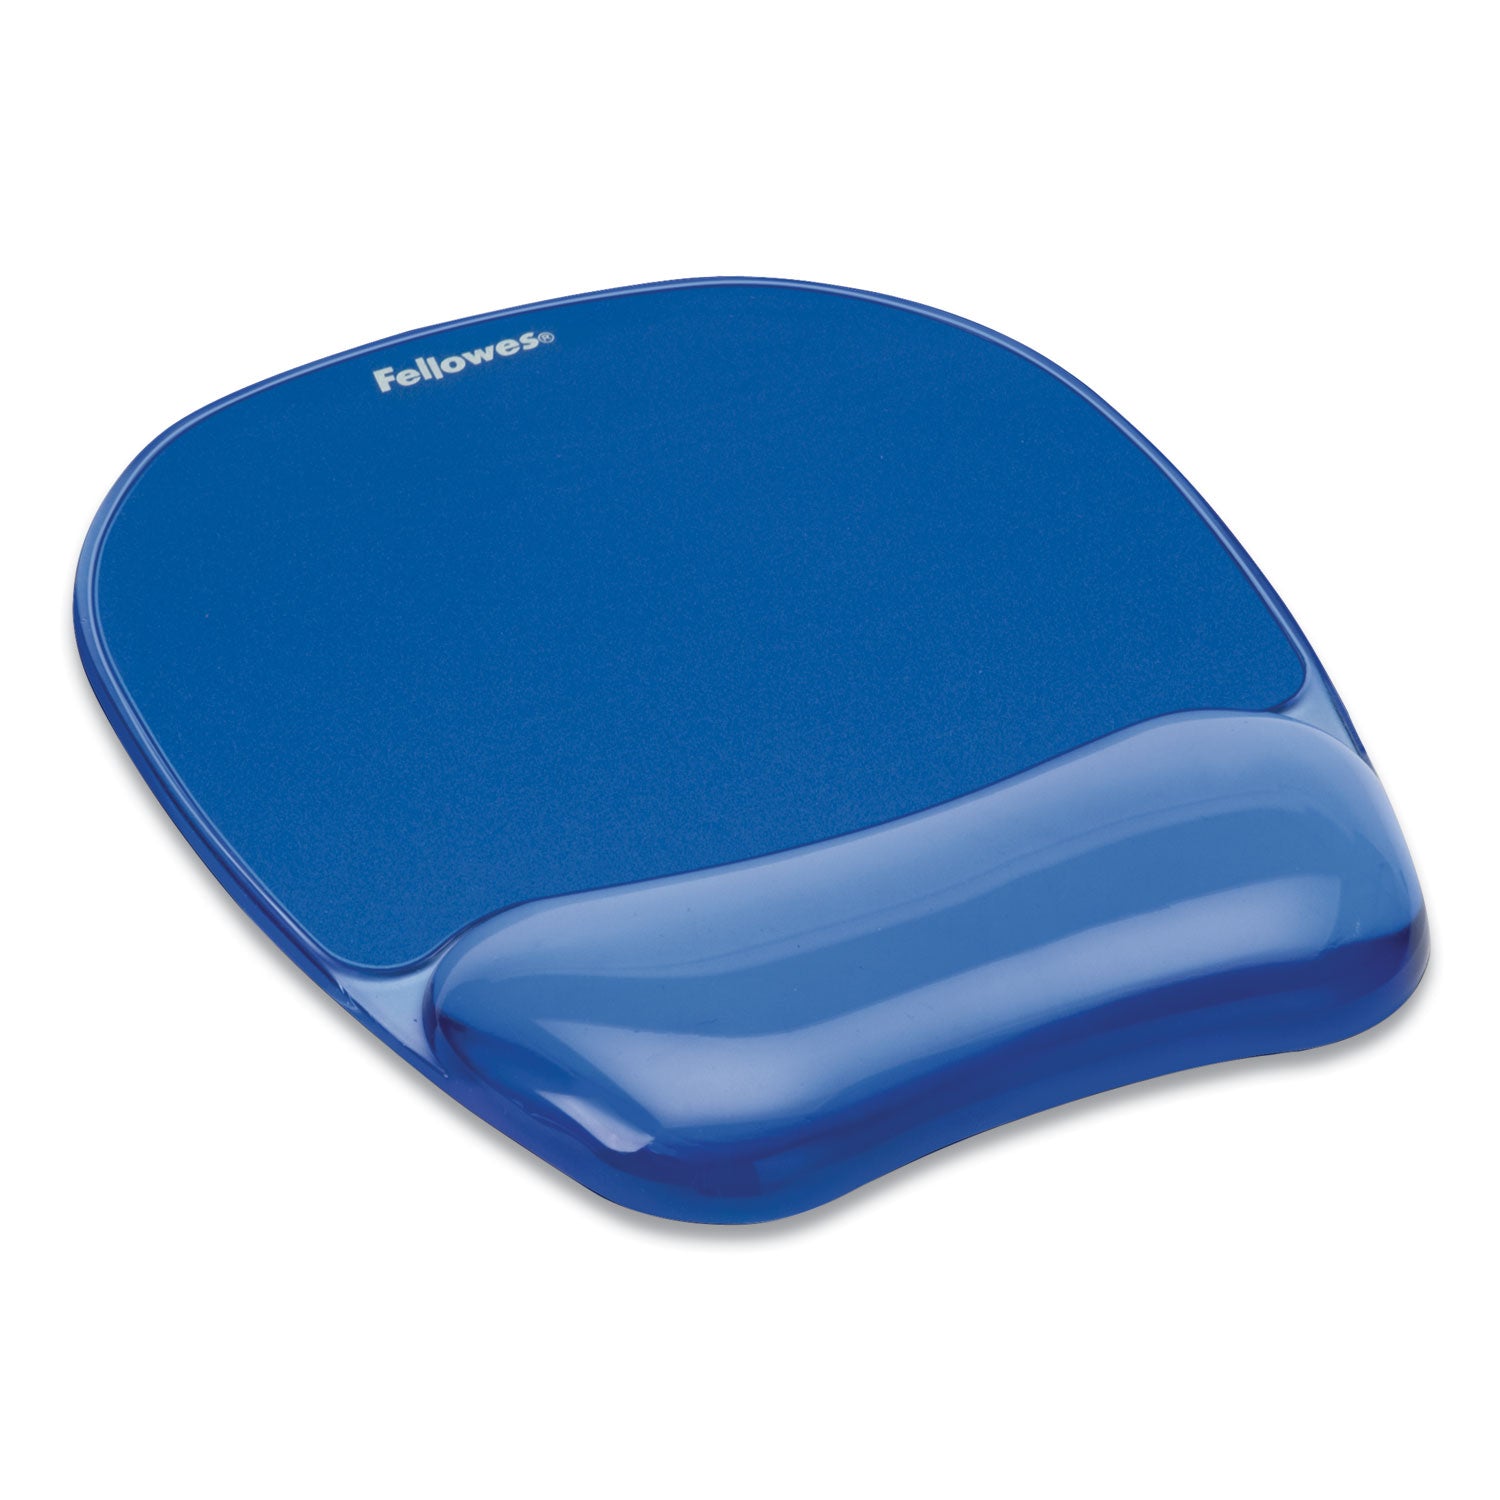 Gel Crystals Mouse Pad with Wrist Rest, 7.87 x 9.18, Blue - 